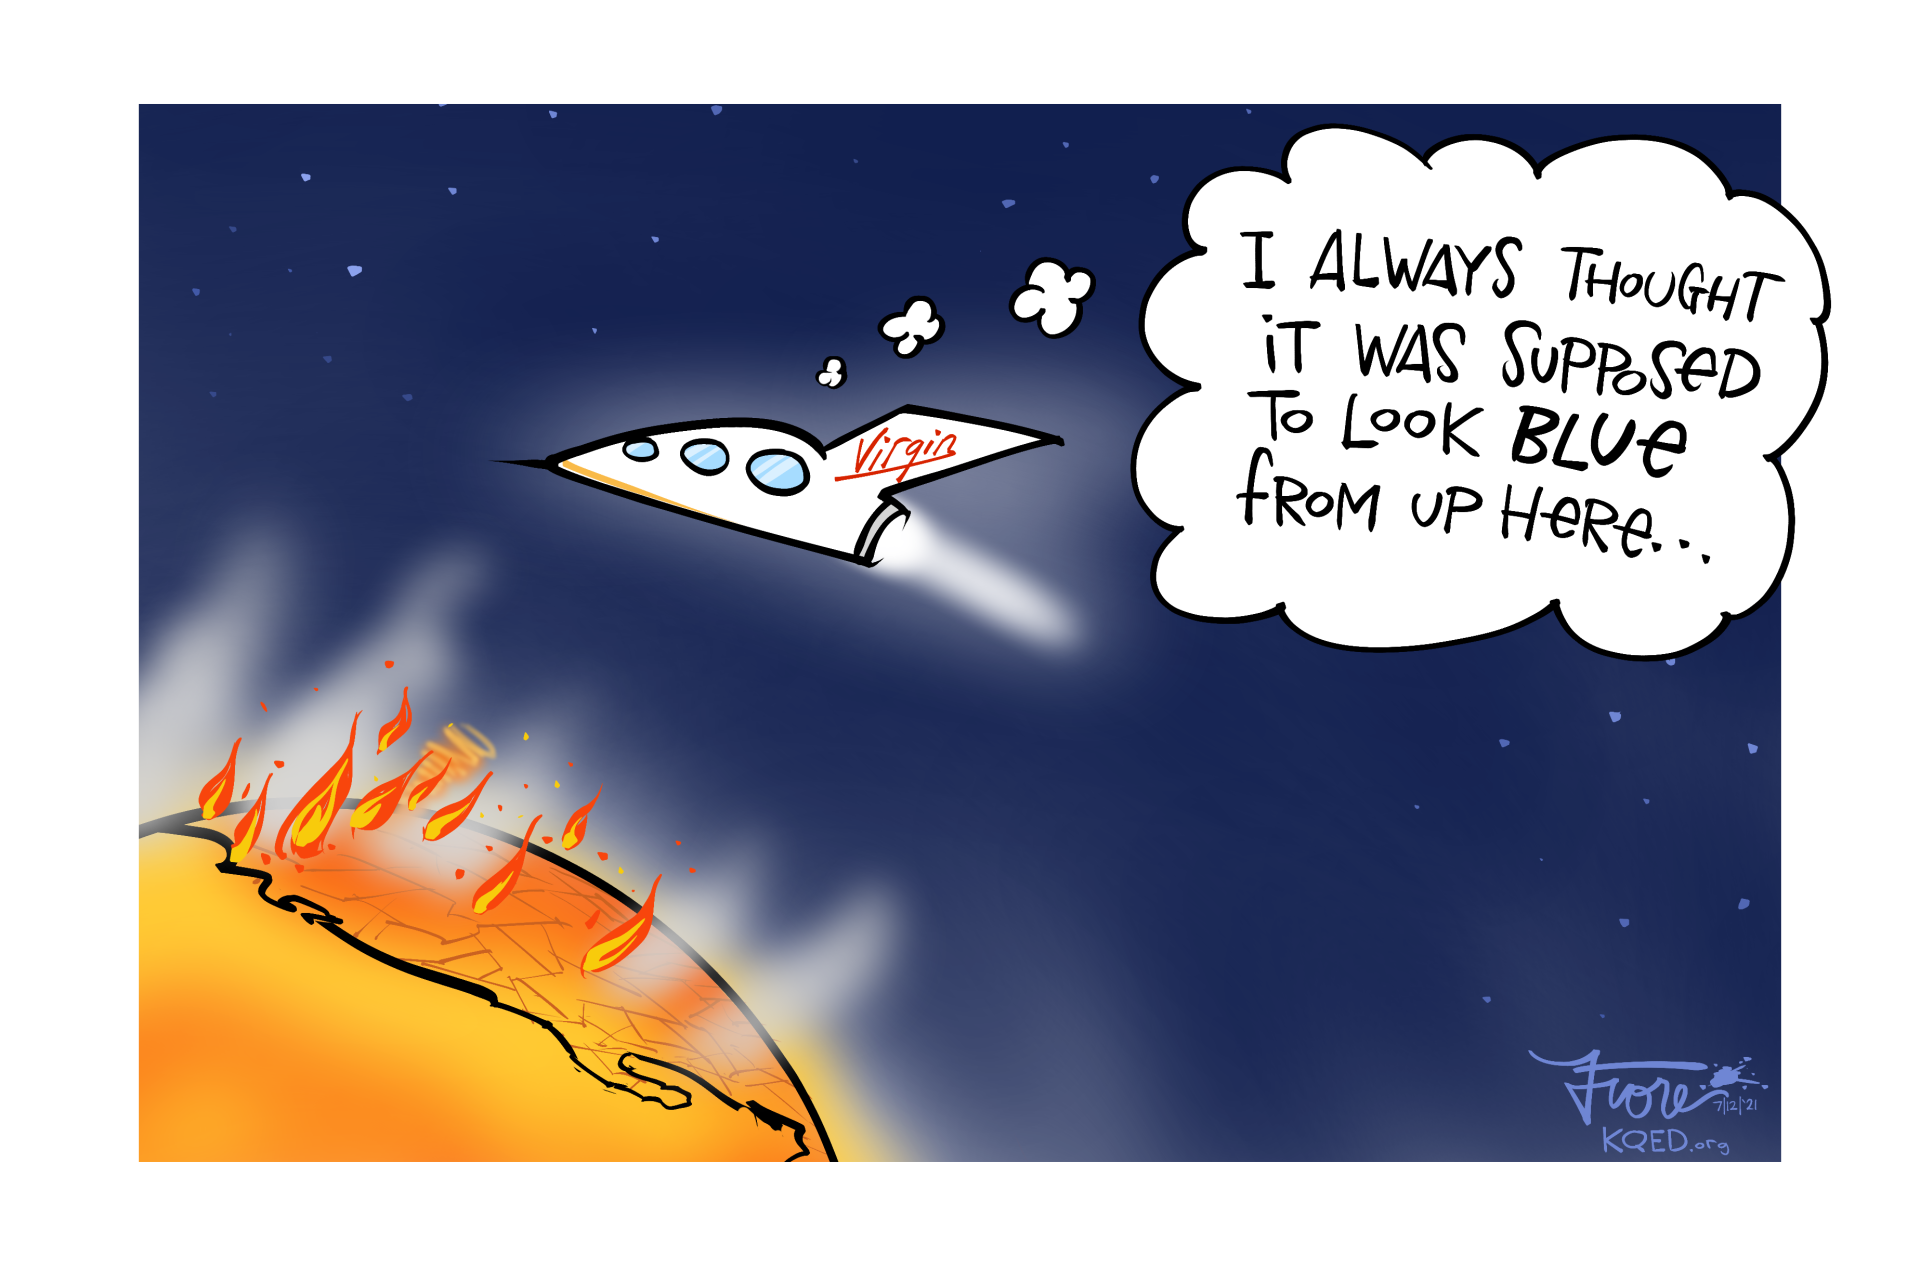 A Mark Fiore cartoon that shows Richard Branson's spaceship flying over a flaming red and orange earth and western United States as a thought bubble over the spaceship reads, "I always thought it was supposed to look blue from up here..."